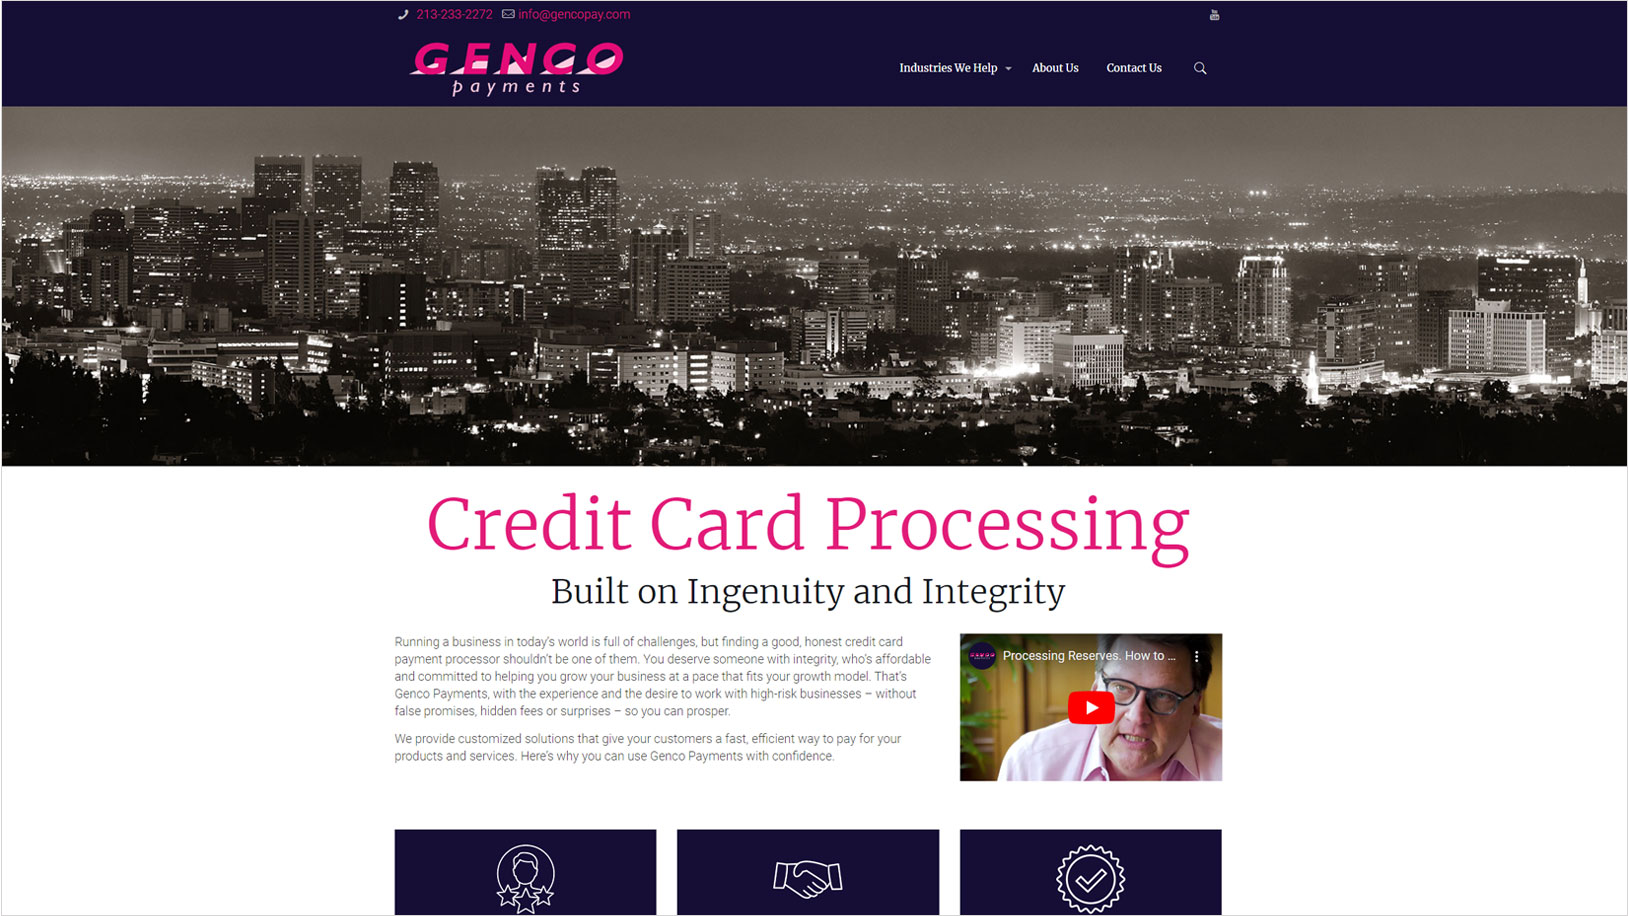 Case Sstudy Genco Payments